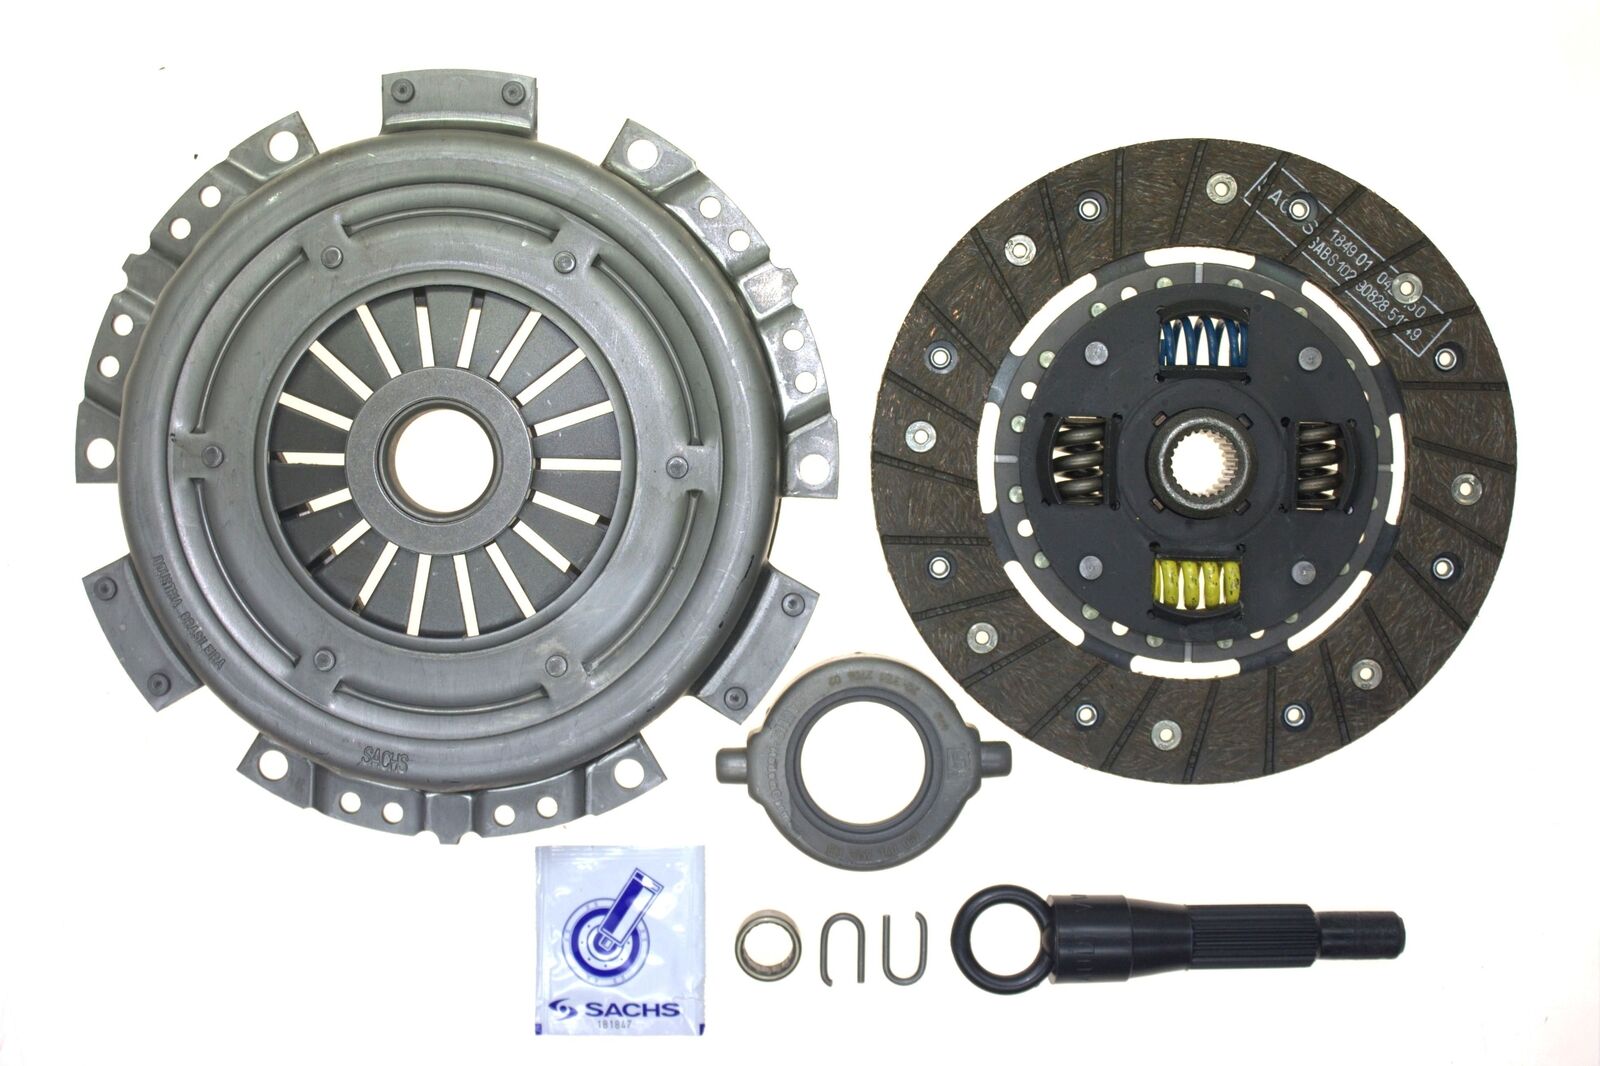  Clutch Kit for Volkswagen Beetle 1967 - 1970 & Others SACHSKF193-01